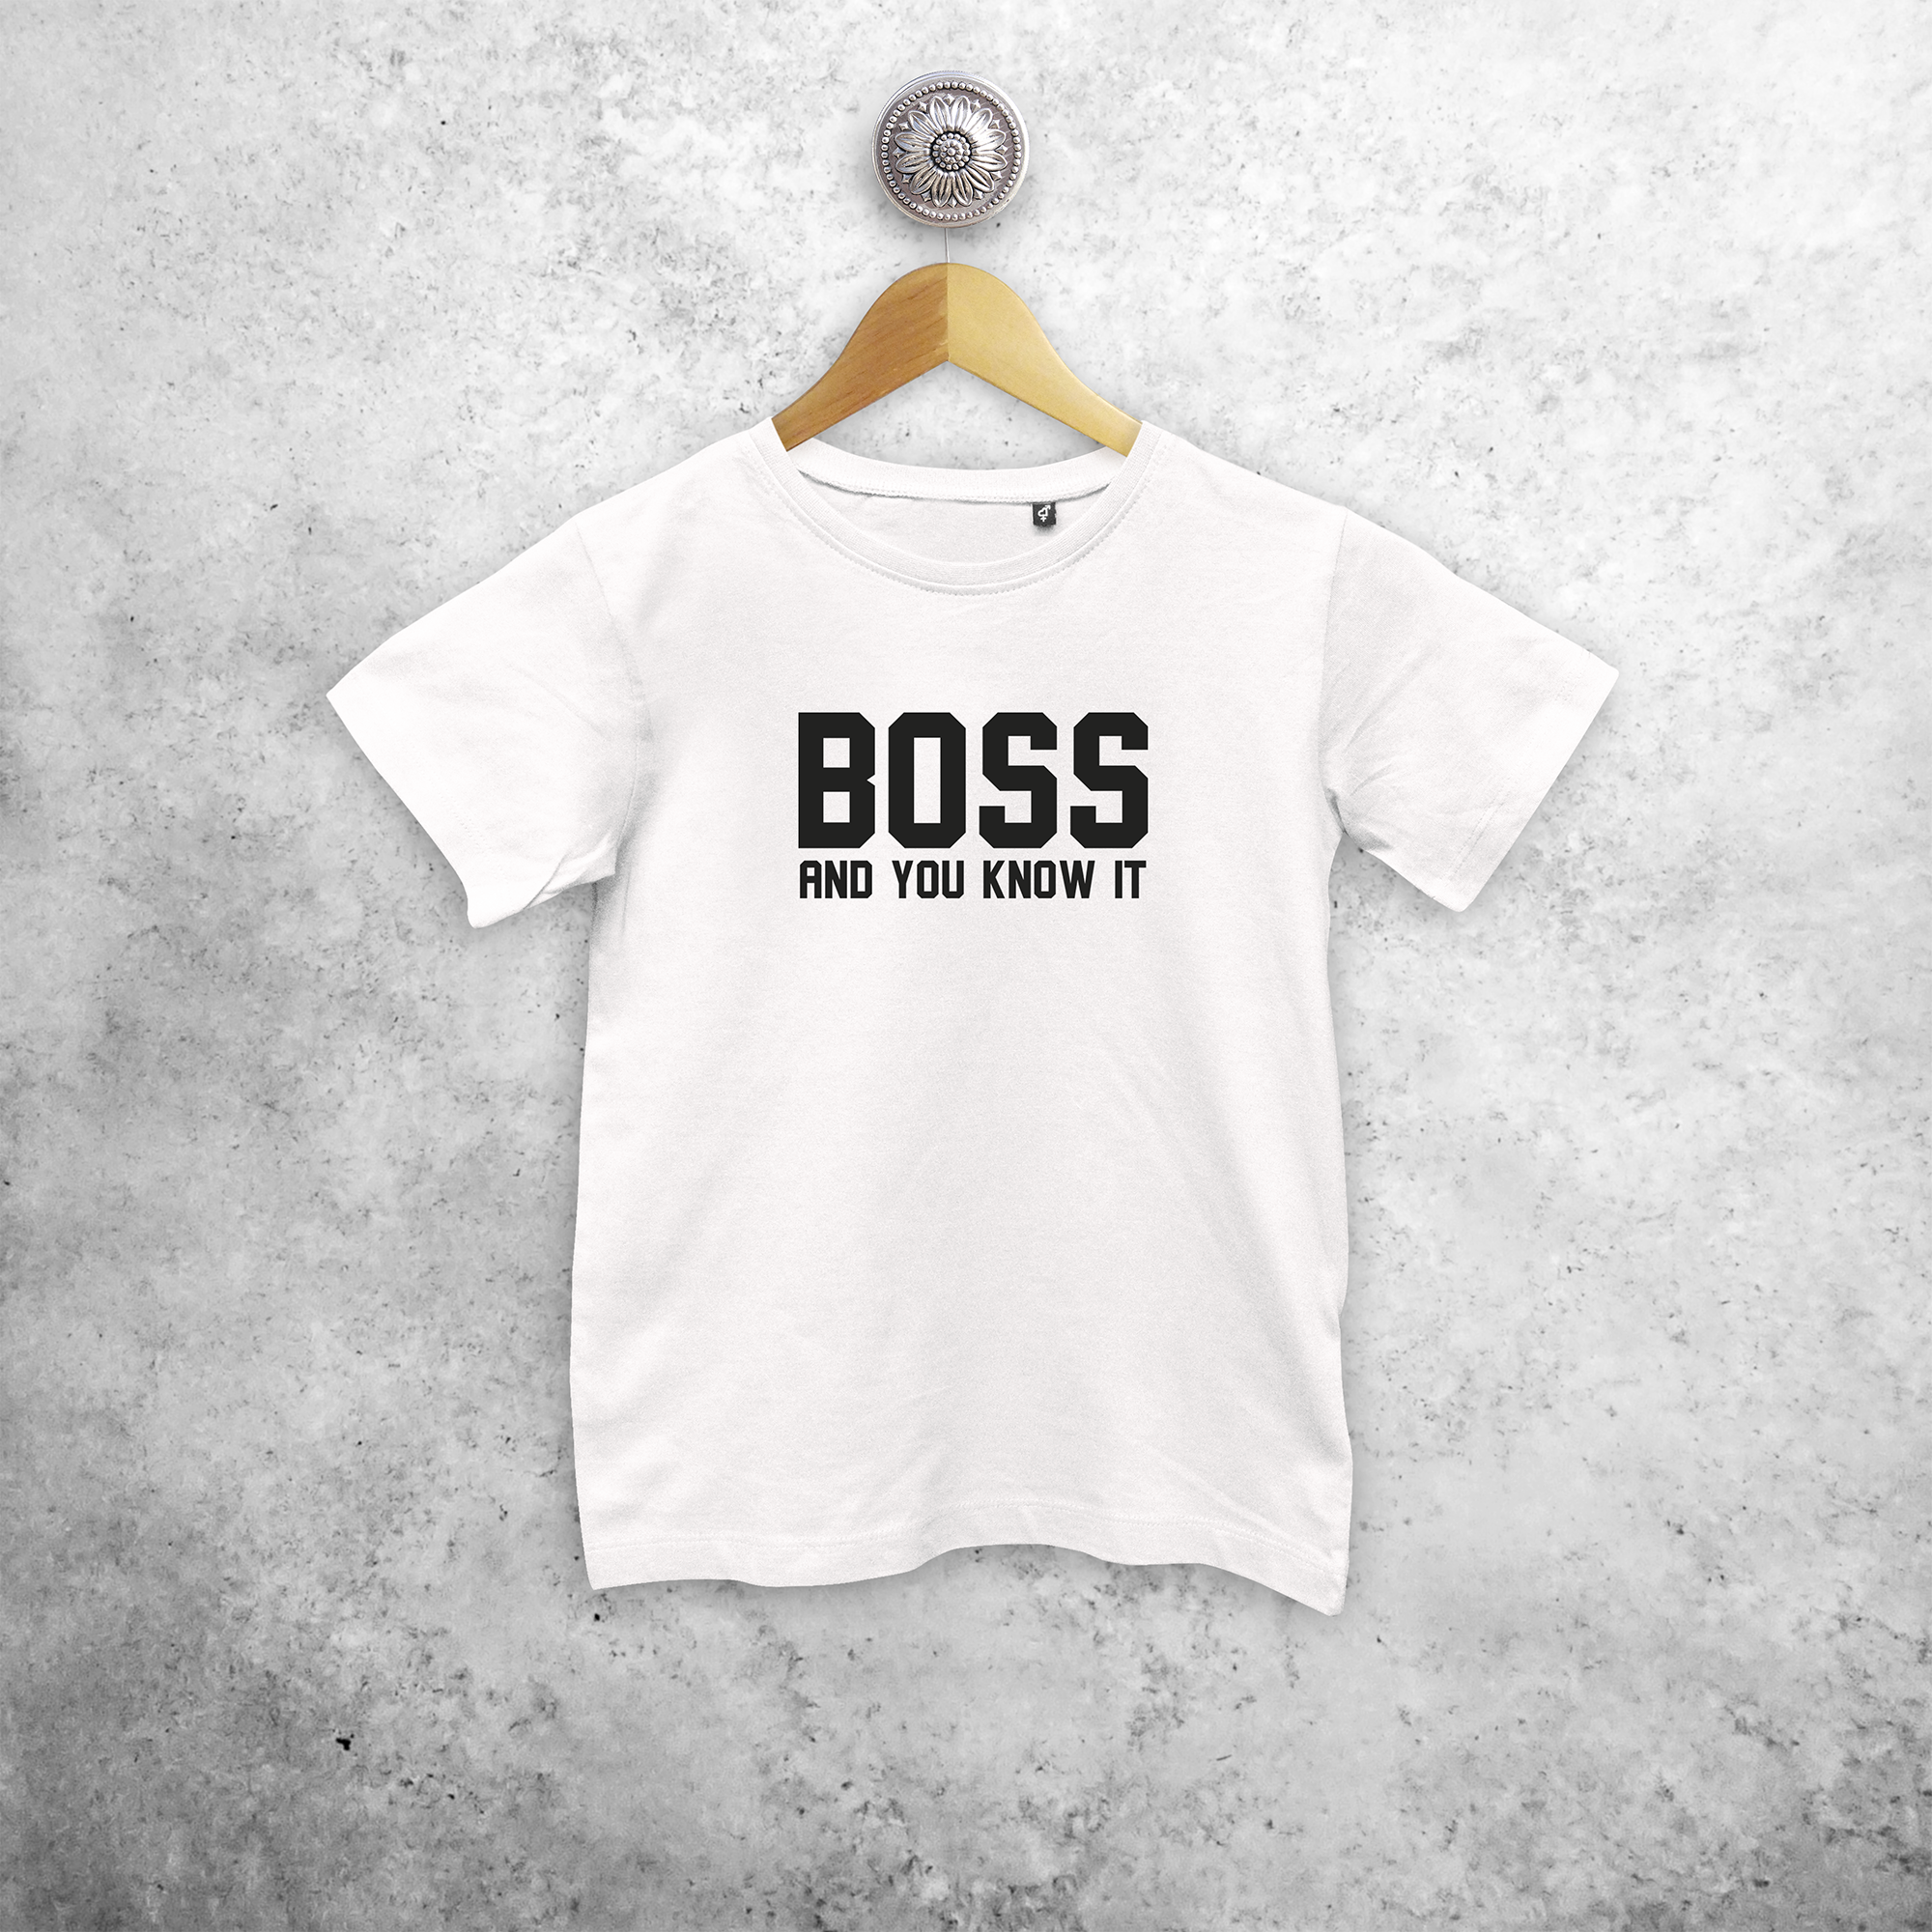 'Boss and you know it' kids shortsleeve shirt